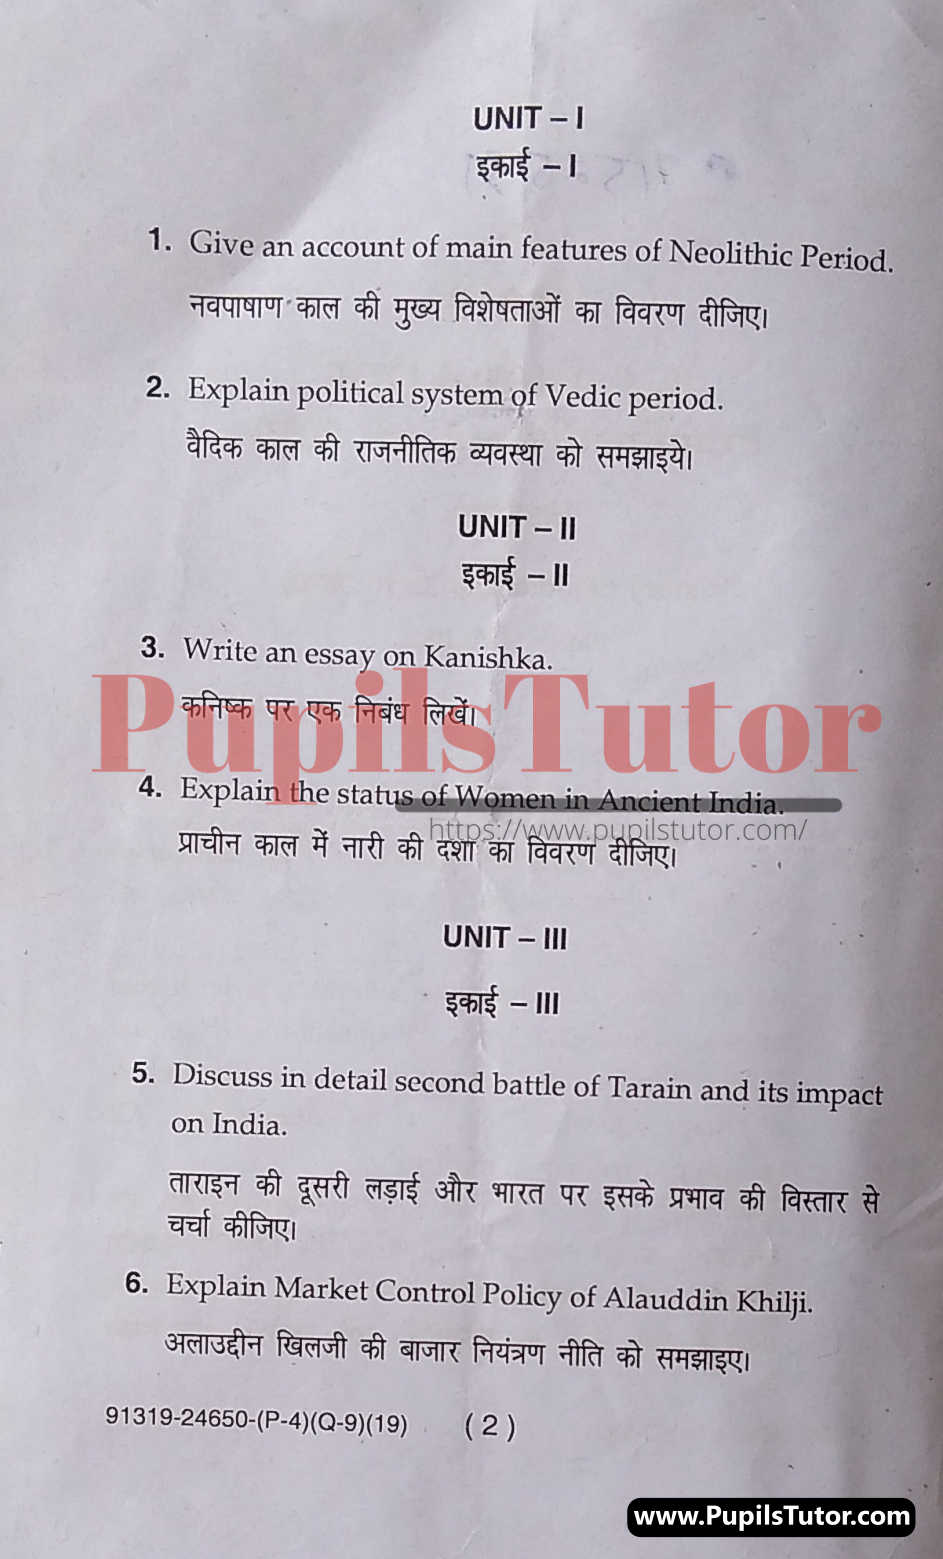 M.D. University B.A. History Of India (Earlier To 1526) First Year Important Question Answer And Solution - www.pupilstutor.com (Paper Page Number 2)